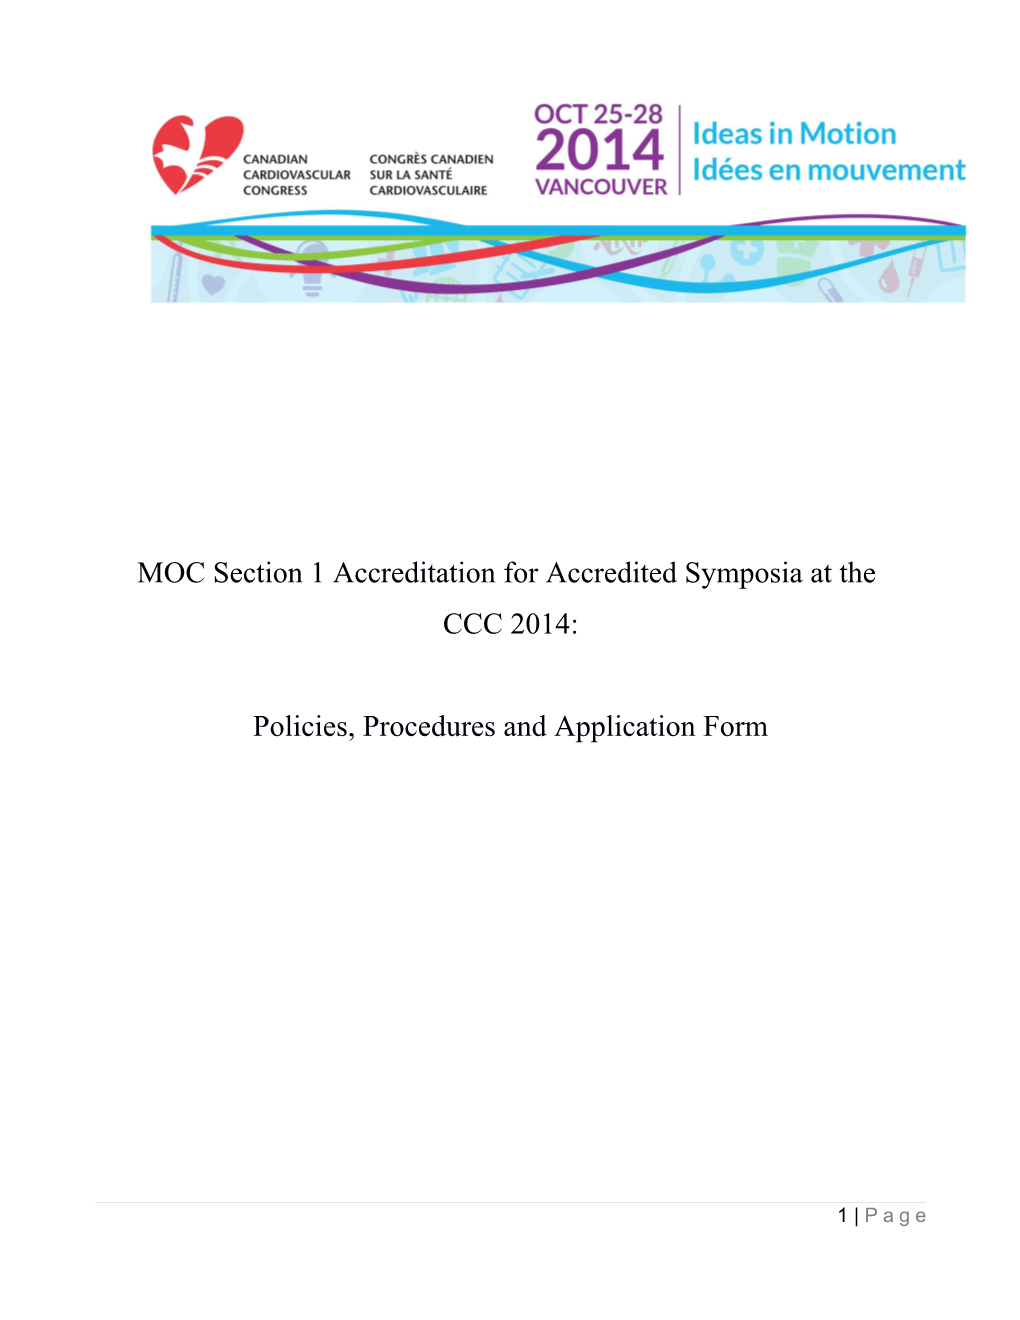 MOC Section 1 Accreditation for Accredited Symposia at The